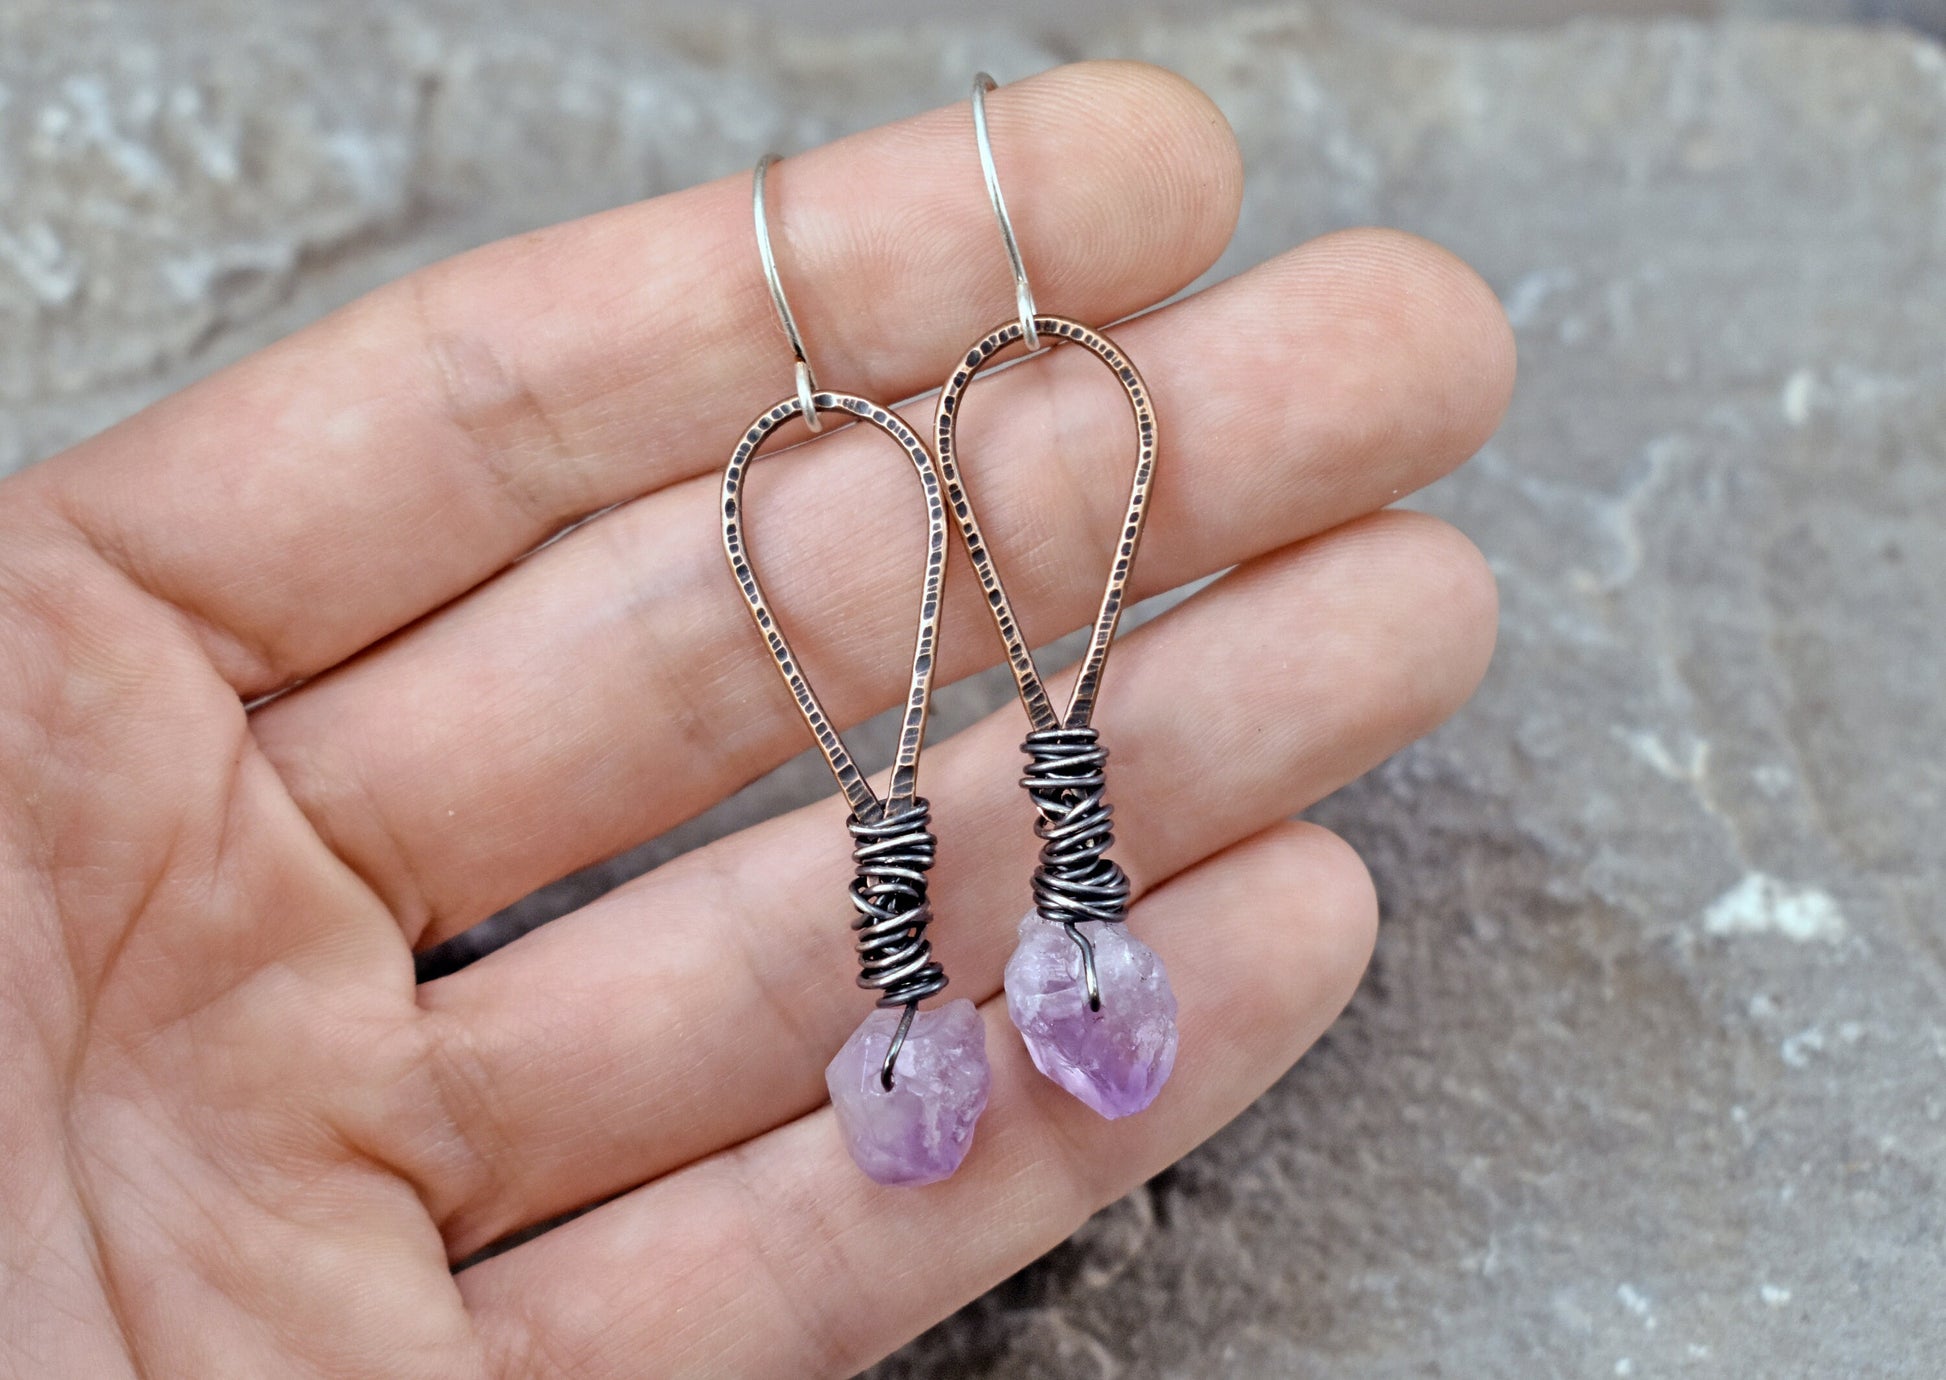 Raw Amethyst Mixed Metal Earrings, Rough Gemstone Jewelry, Rustic Copper Wire Dangles, Sterling Silver Ear Wires